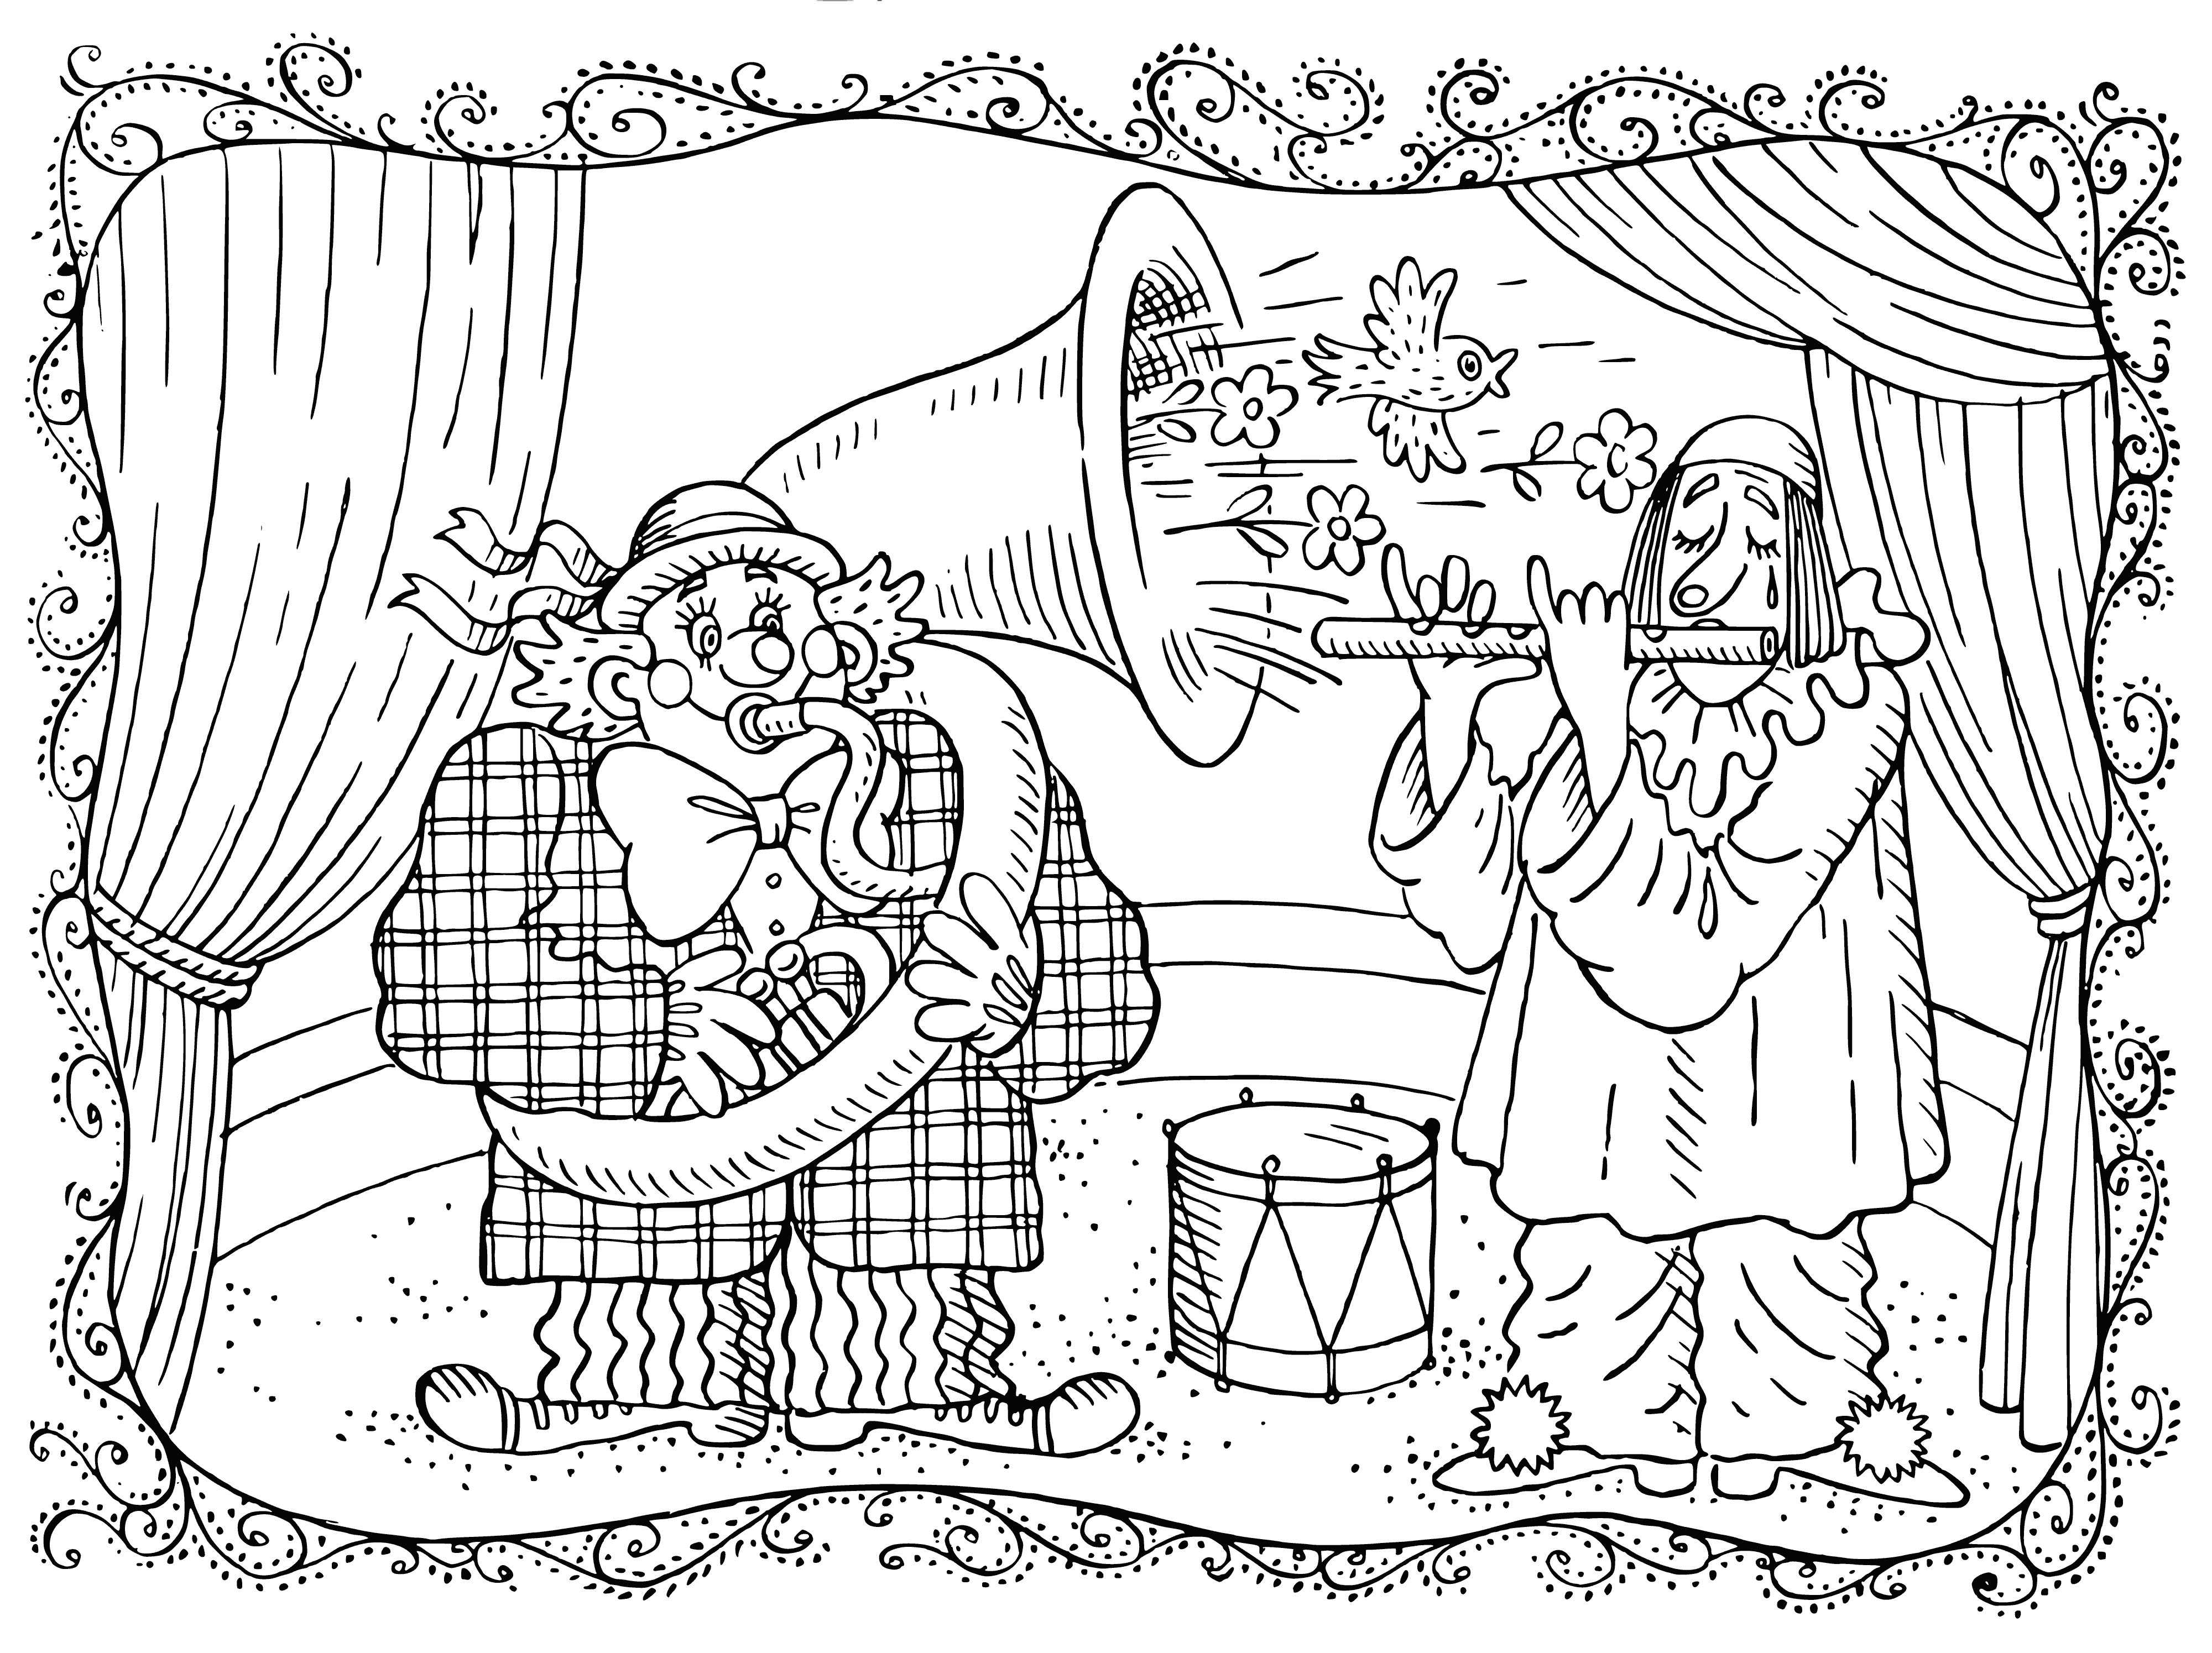 Tuba and flute coloring page